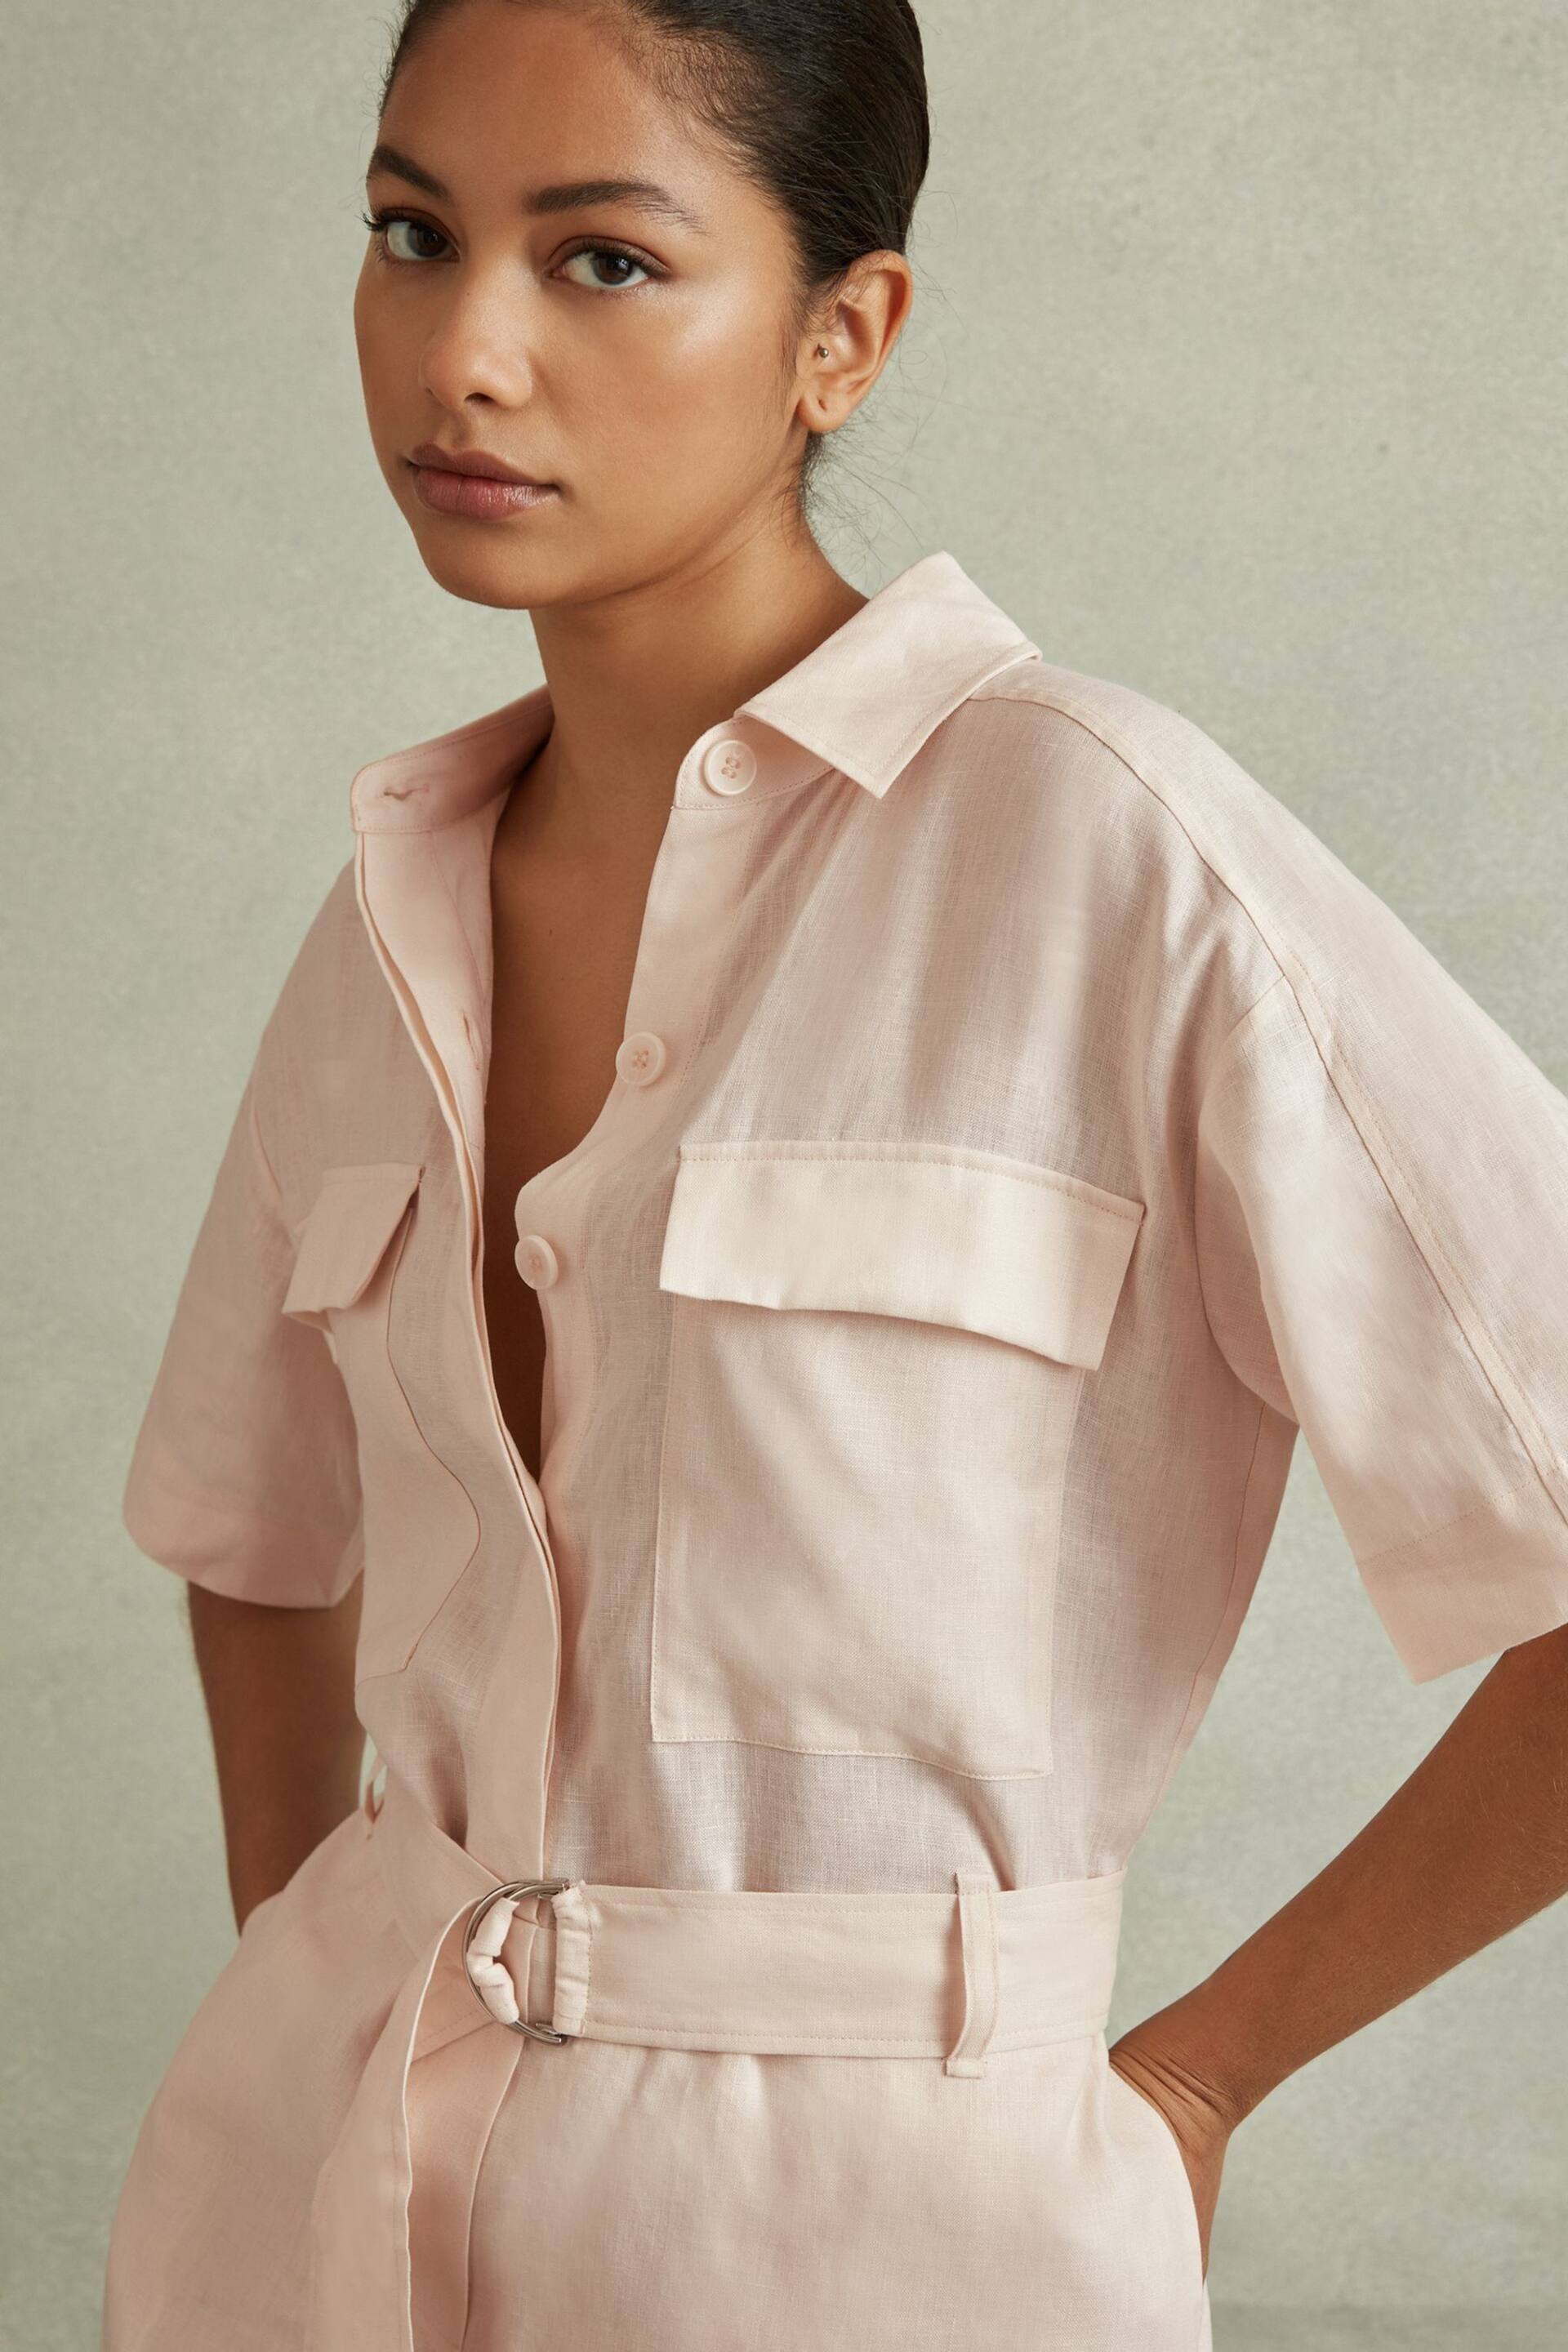 Reiss Pink Selina Linen Belted Playsuit - Image 1 of 5